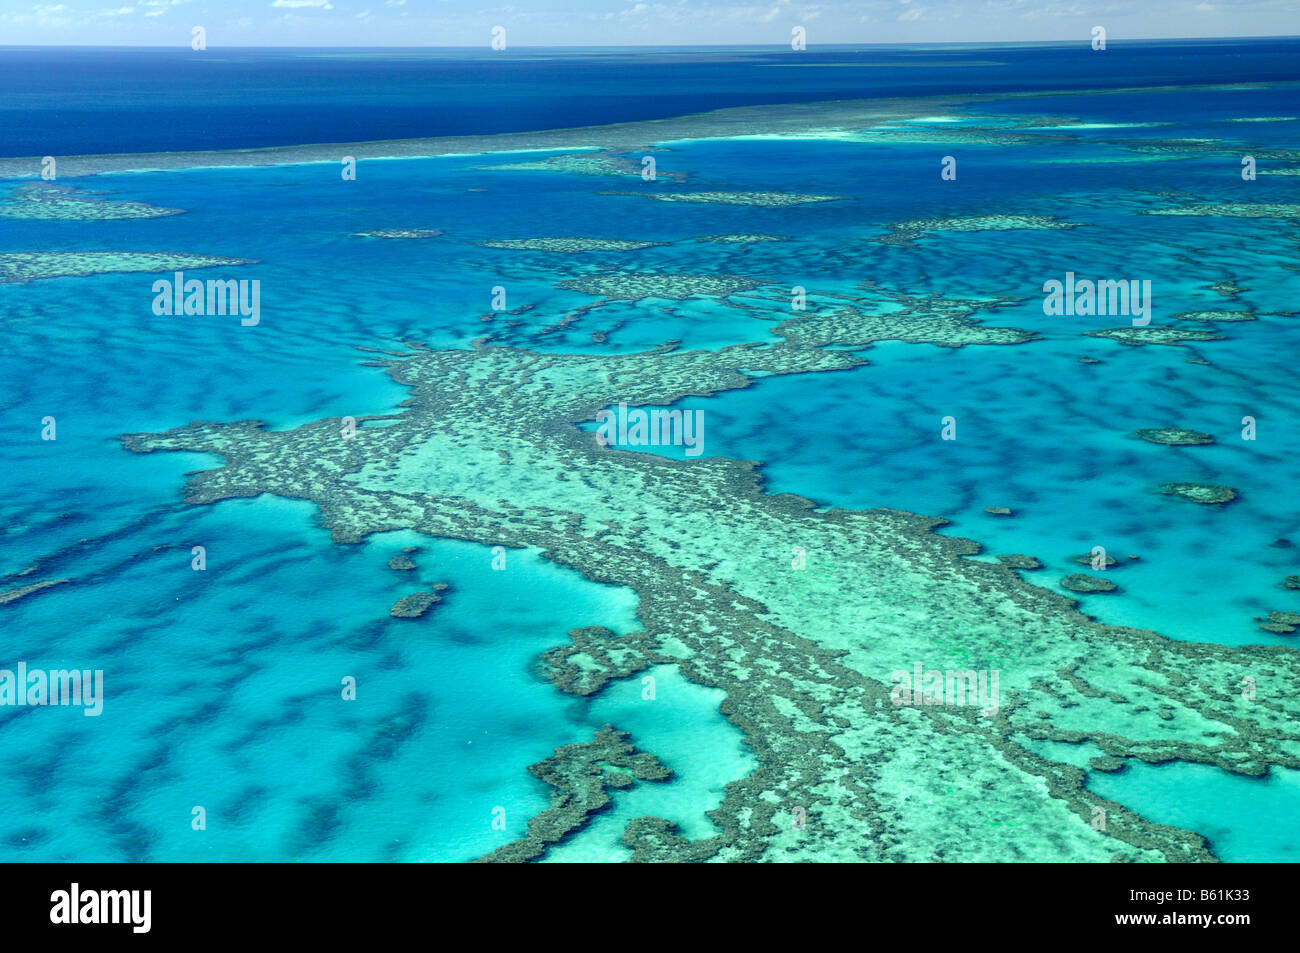 Reefs and atolls of the Great Barrier Reef, Australia Stock Photo